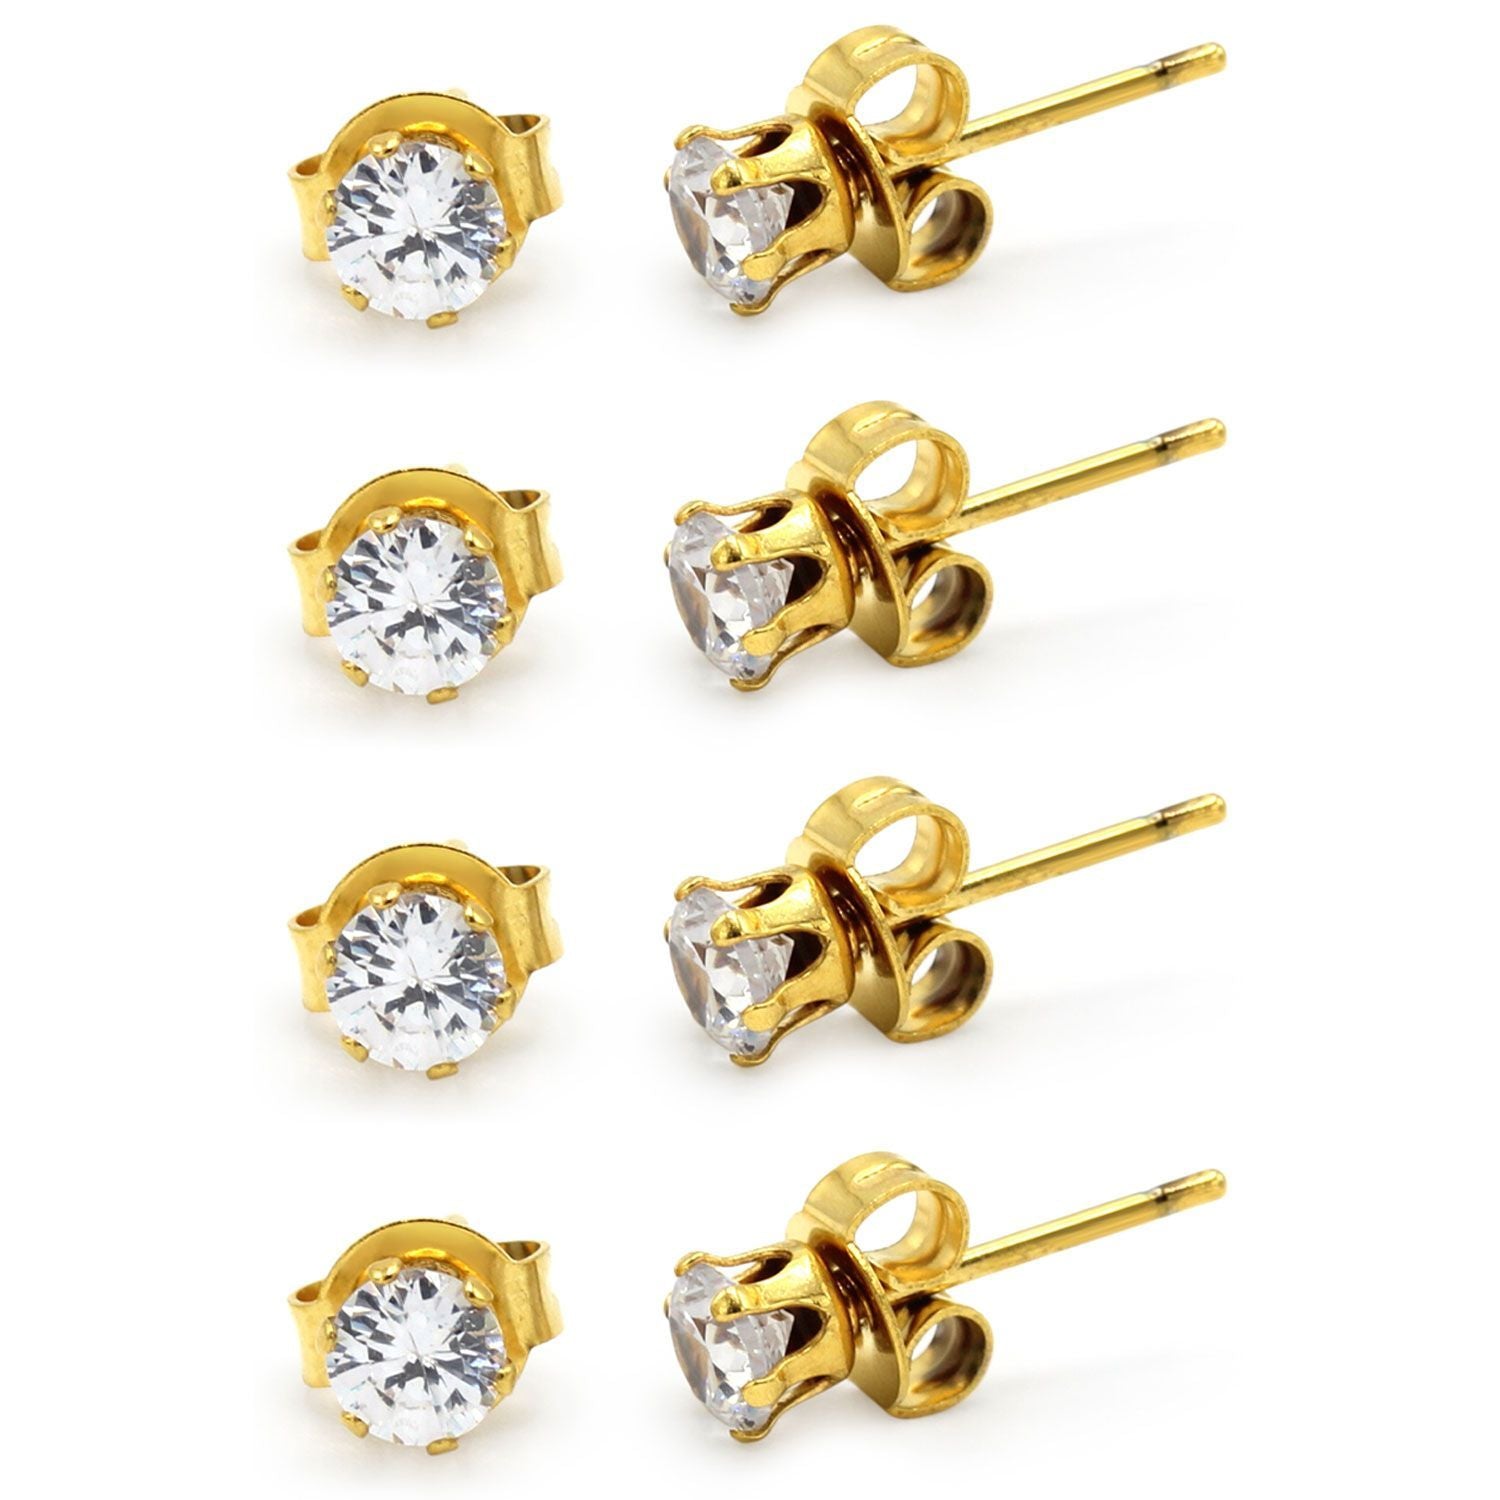 Cubic Zirconia Round 14K Gold Plated Stud Earrings Set Of 4 Stainless Steel Jewelry Men Women